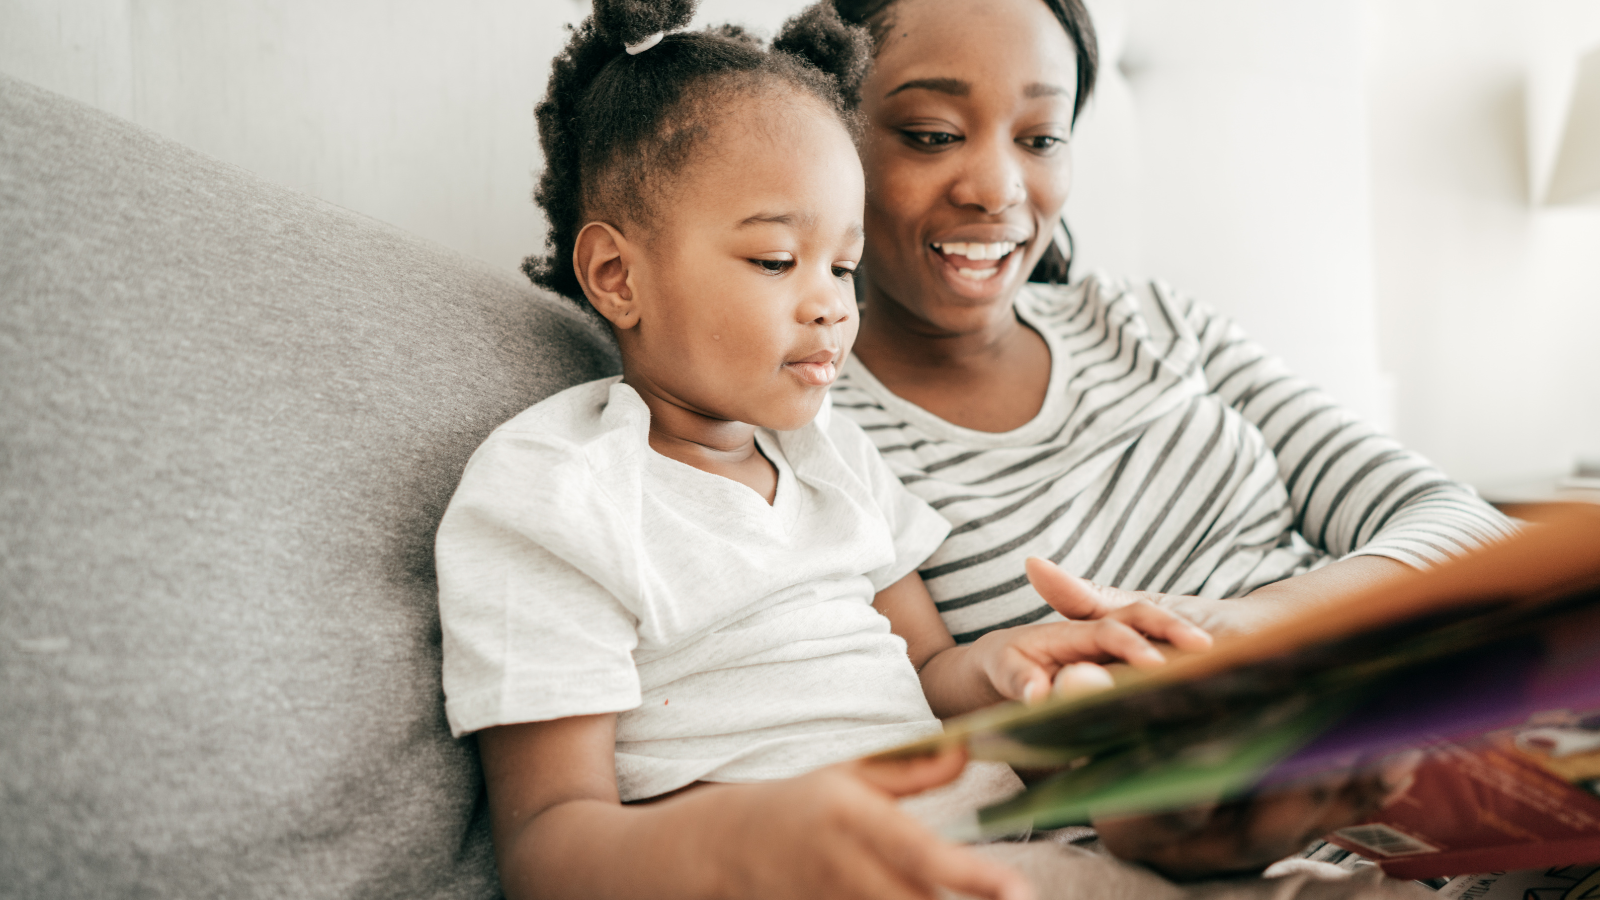 FREE tips and resources to help your preschooler or school-aged child learn “book language” for later school and life success